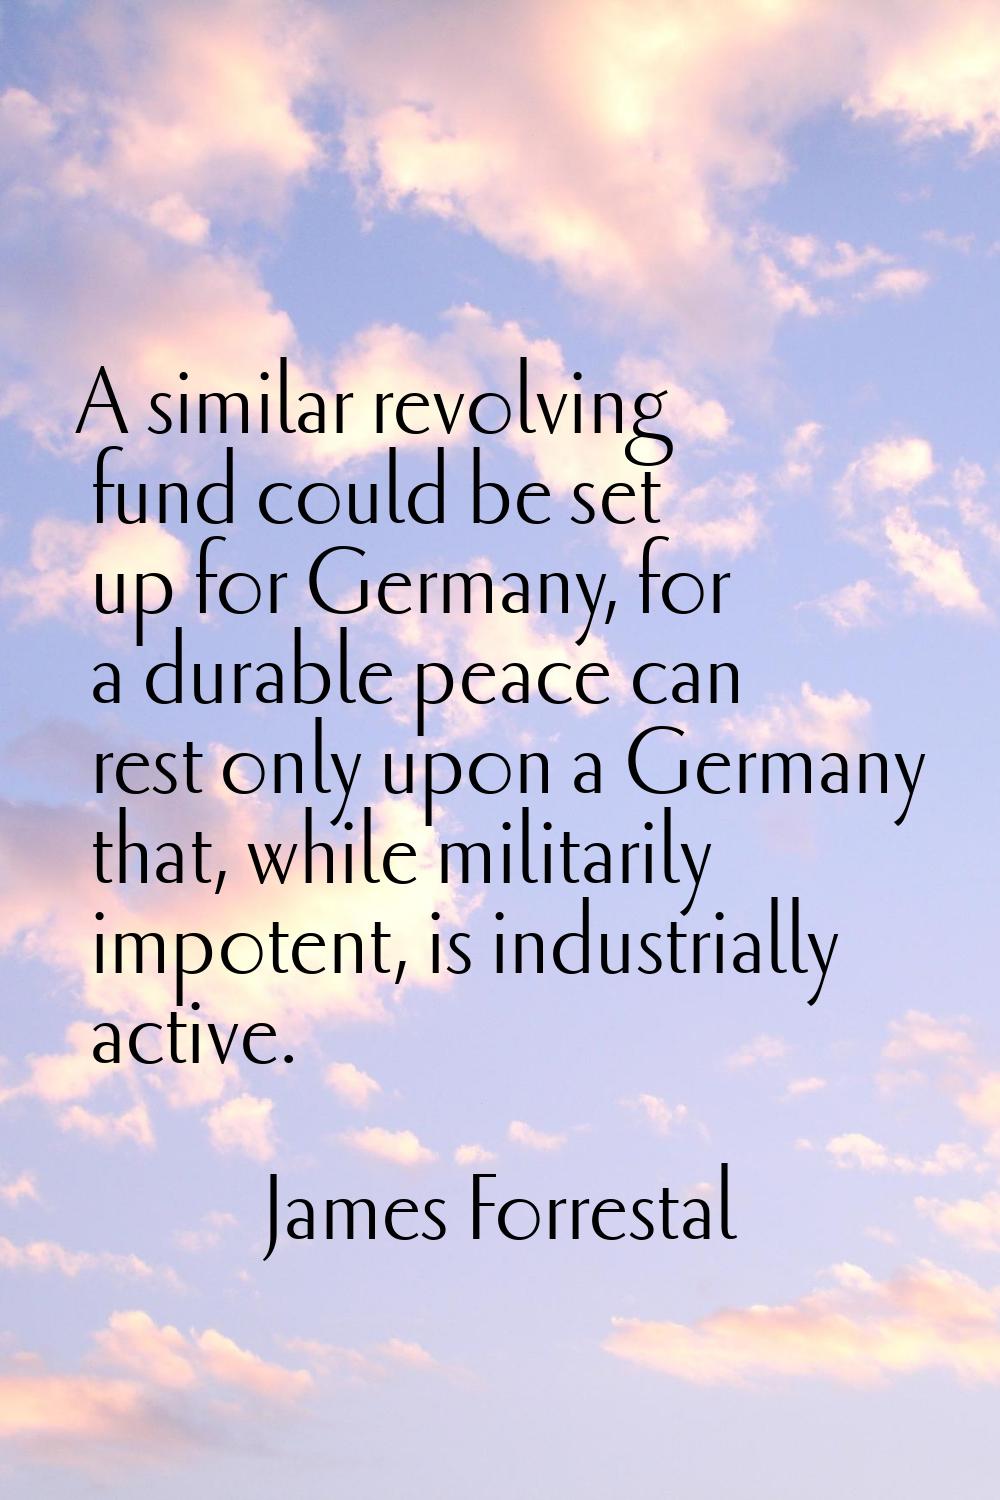 A similar revolving fund could be set up for Germany, for a durable peace can rest only upon a Germ